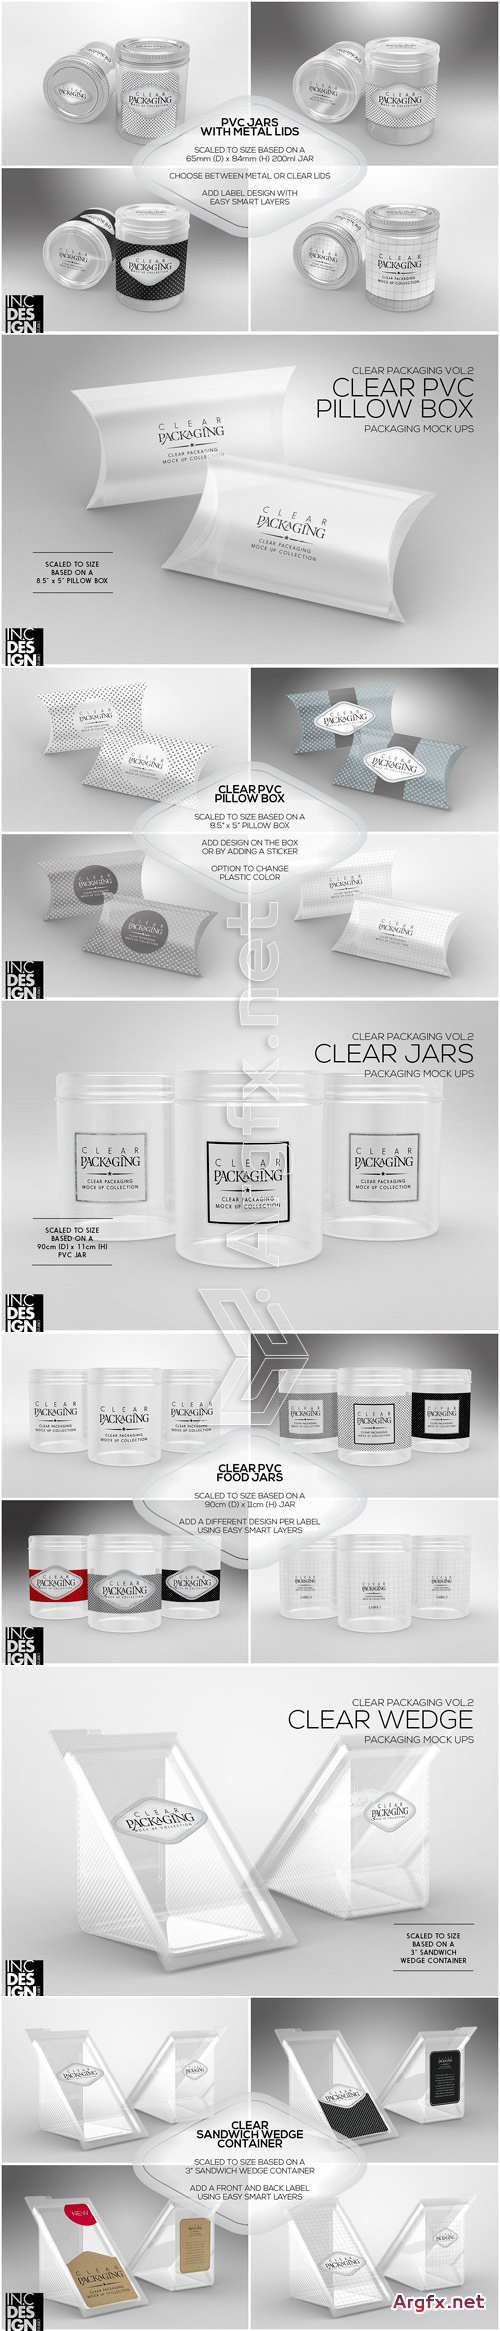 CM 1319399 - 02 Clear Container Packaging MockUps